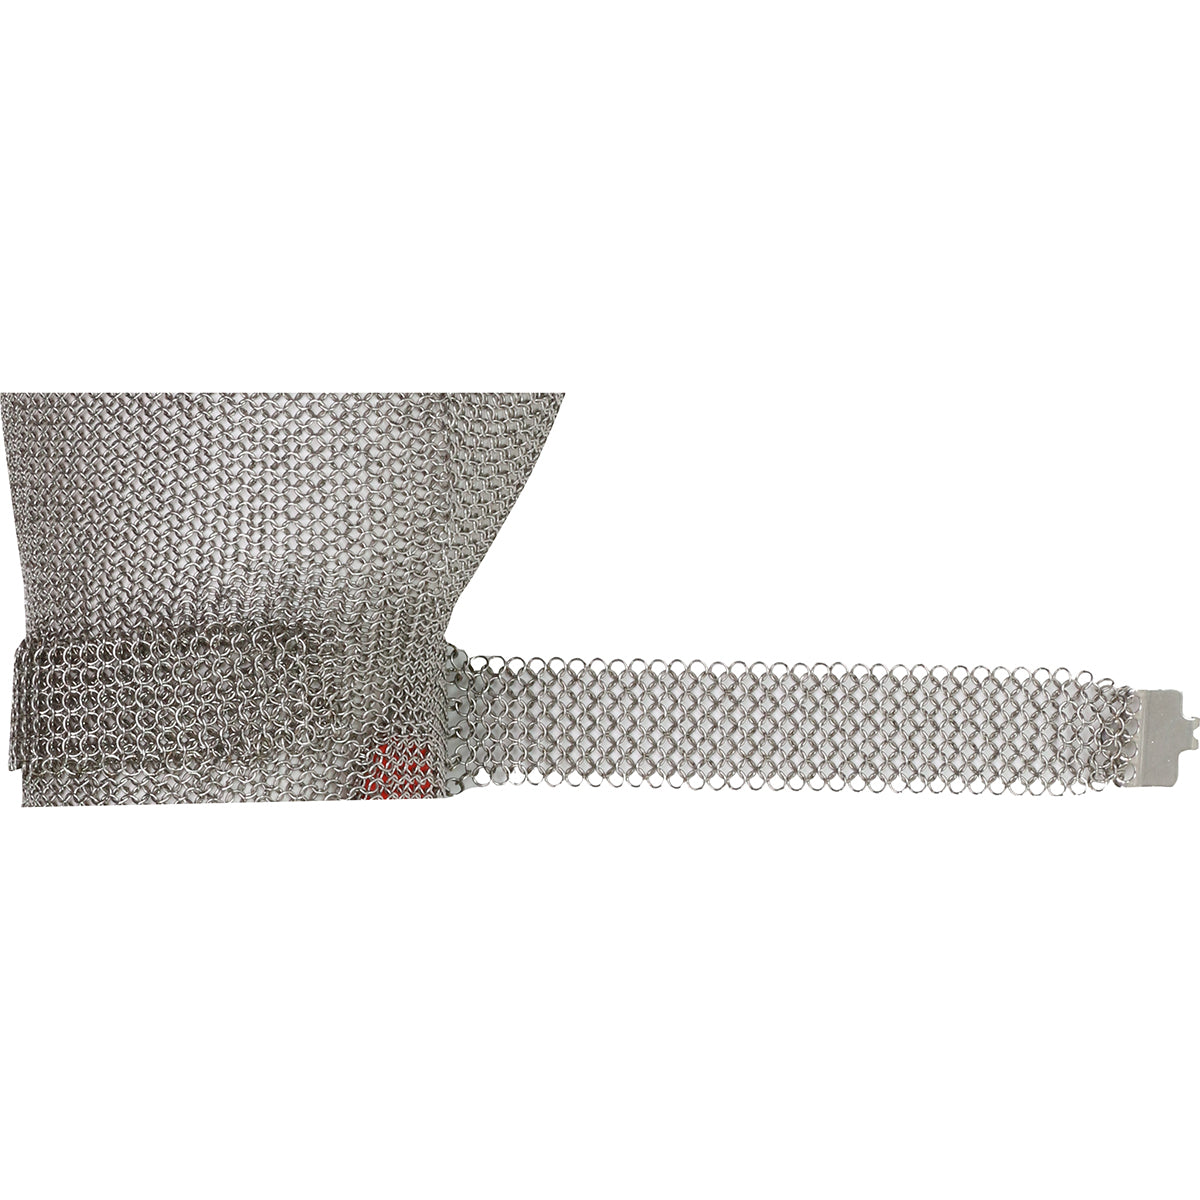 US Mesh USM-1547-M Stainless Steel Mesh Glove with Spring Closure - Forearm Length